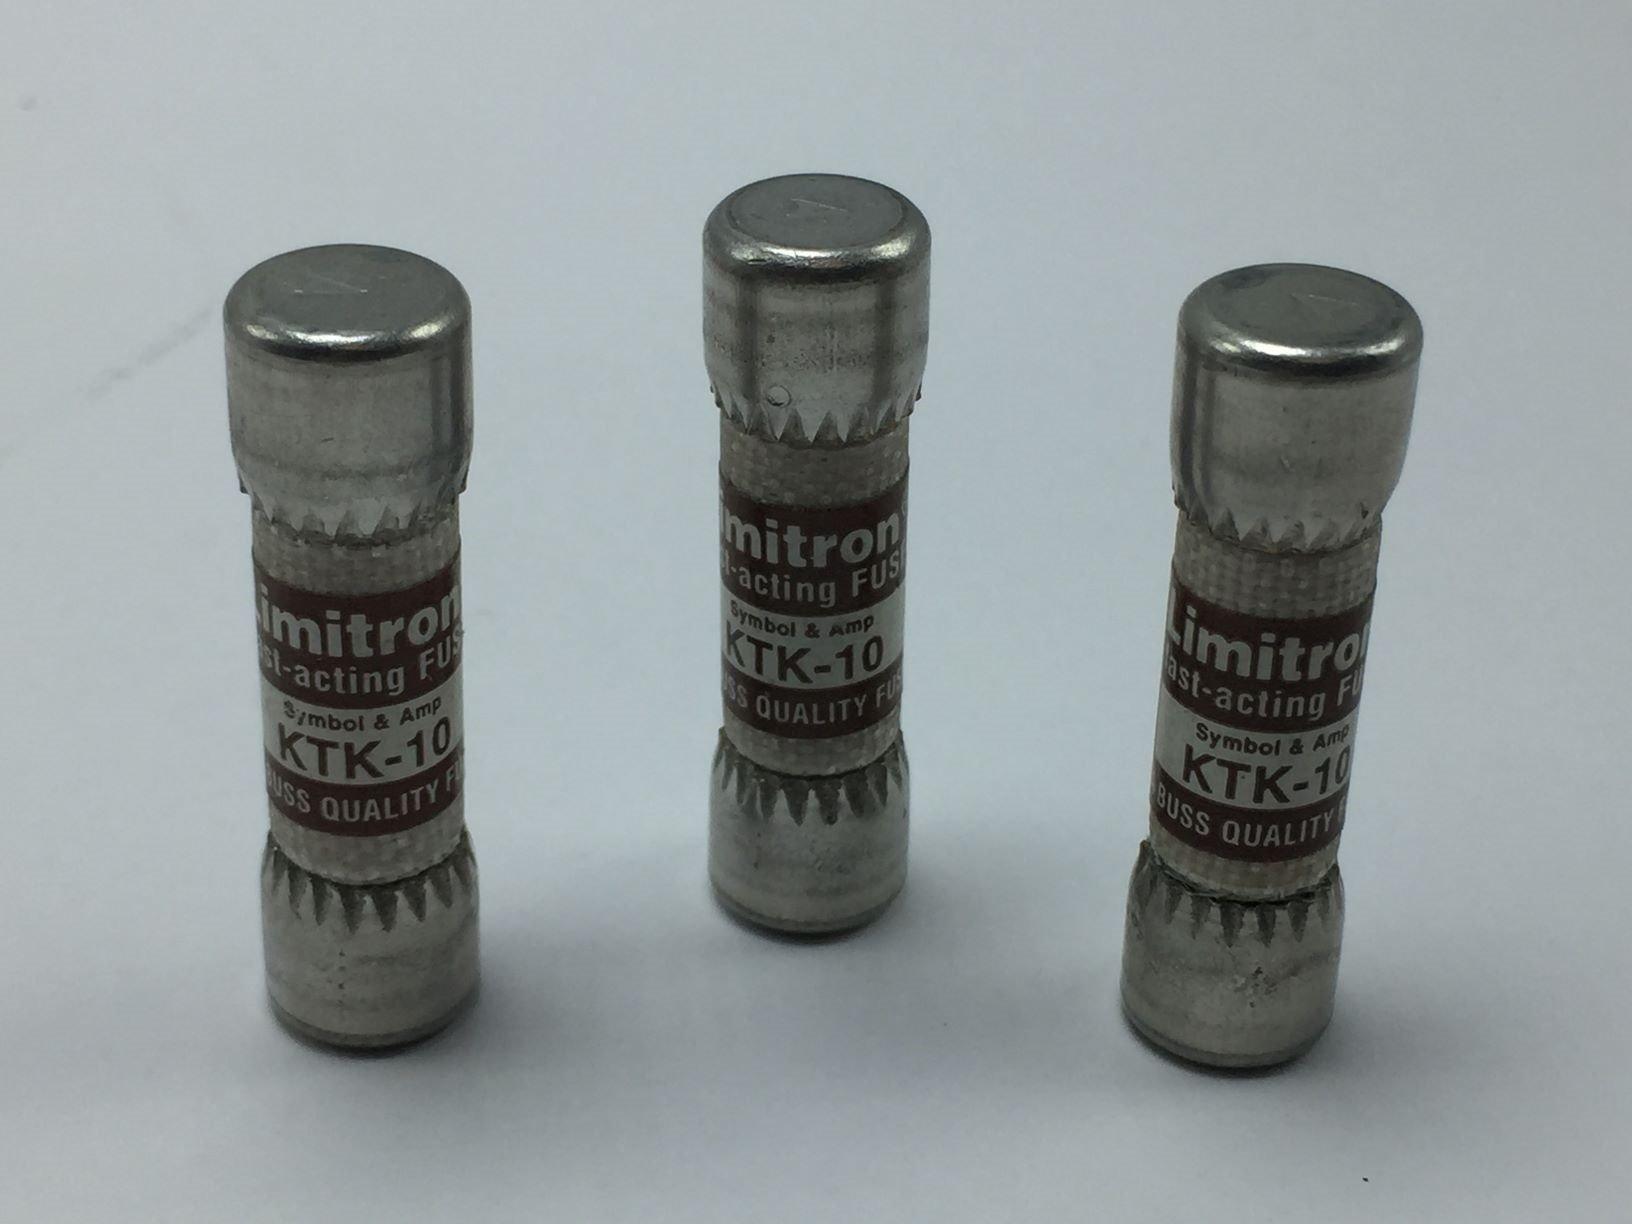 NEW BUSSMANN KTK-10 LIMITRON FAST ACTING FUSE 10A 600V Lot of 3